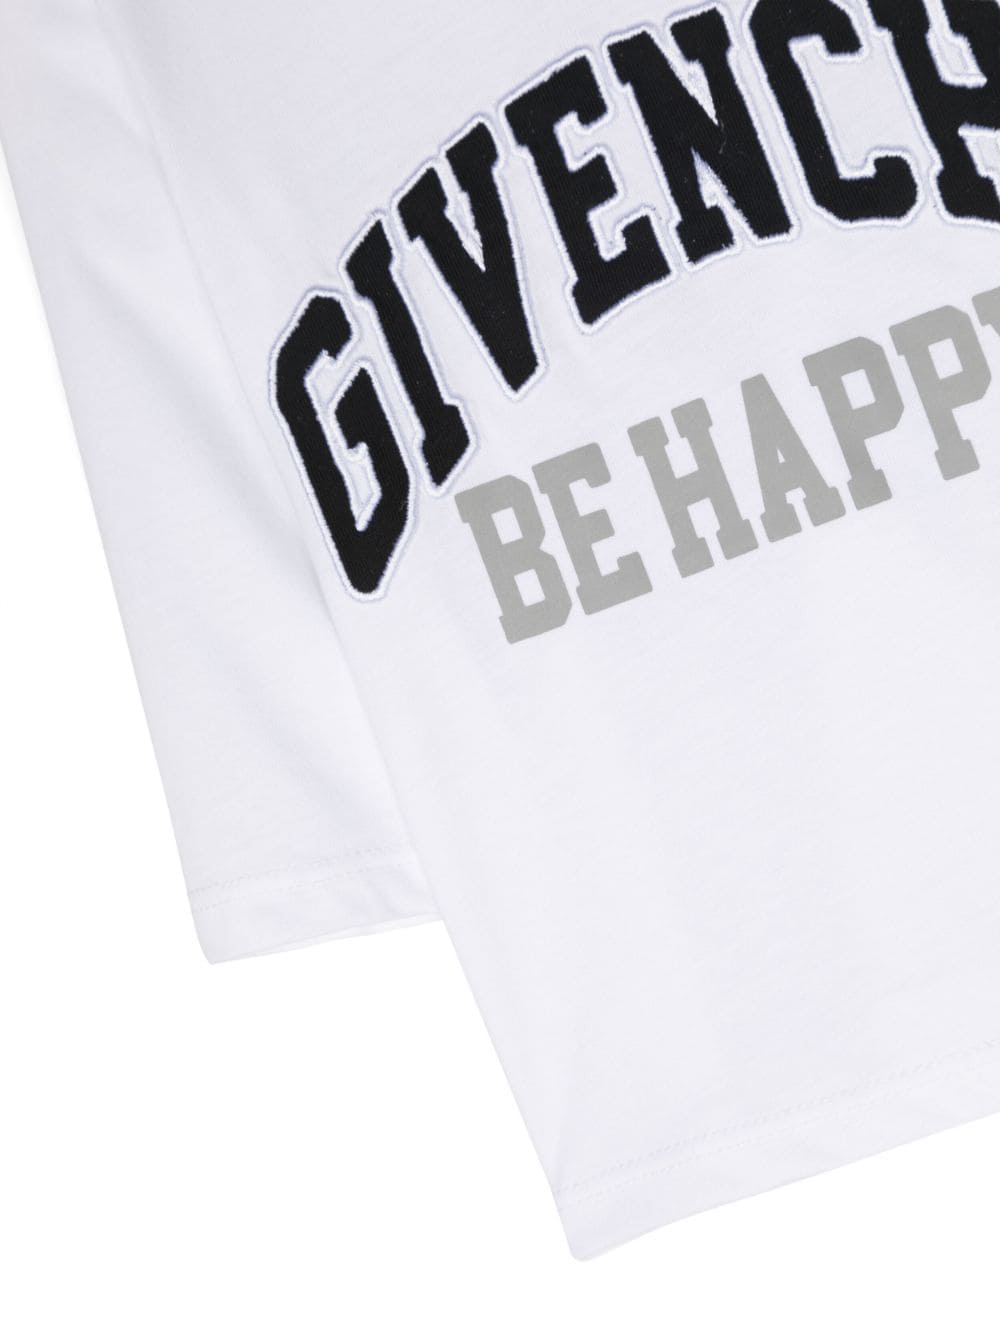 White cotton jersey baby boy GIVENCHY t-shirt